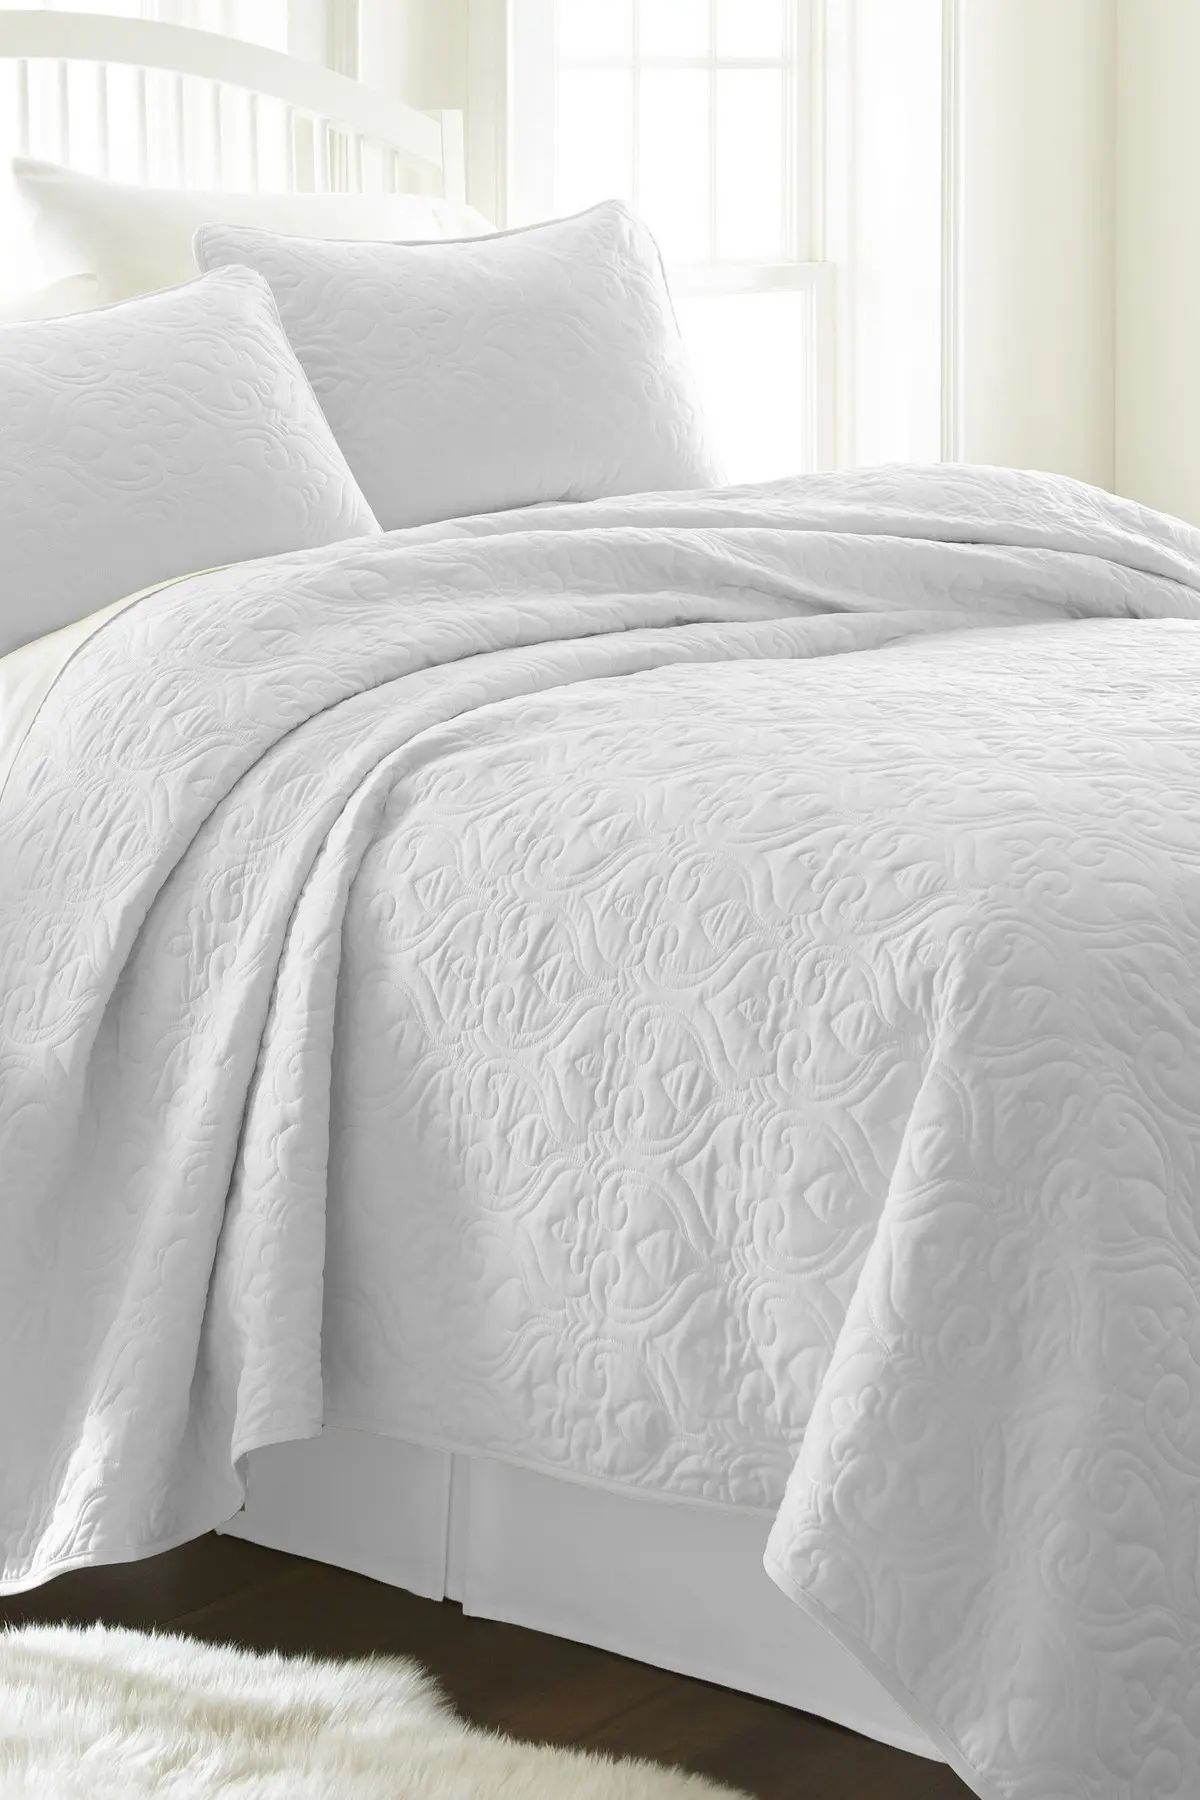 IENJOY HOME Home Spun Premium Ultra Soft Damask Pattern Quilted Twin Coverlet Set - White at Nordstr | Nordstrom Rack